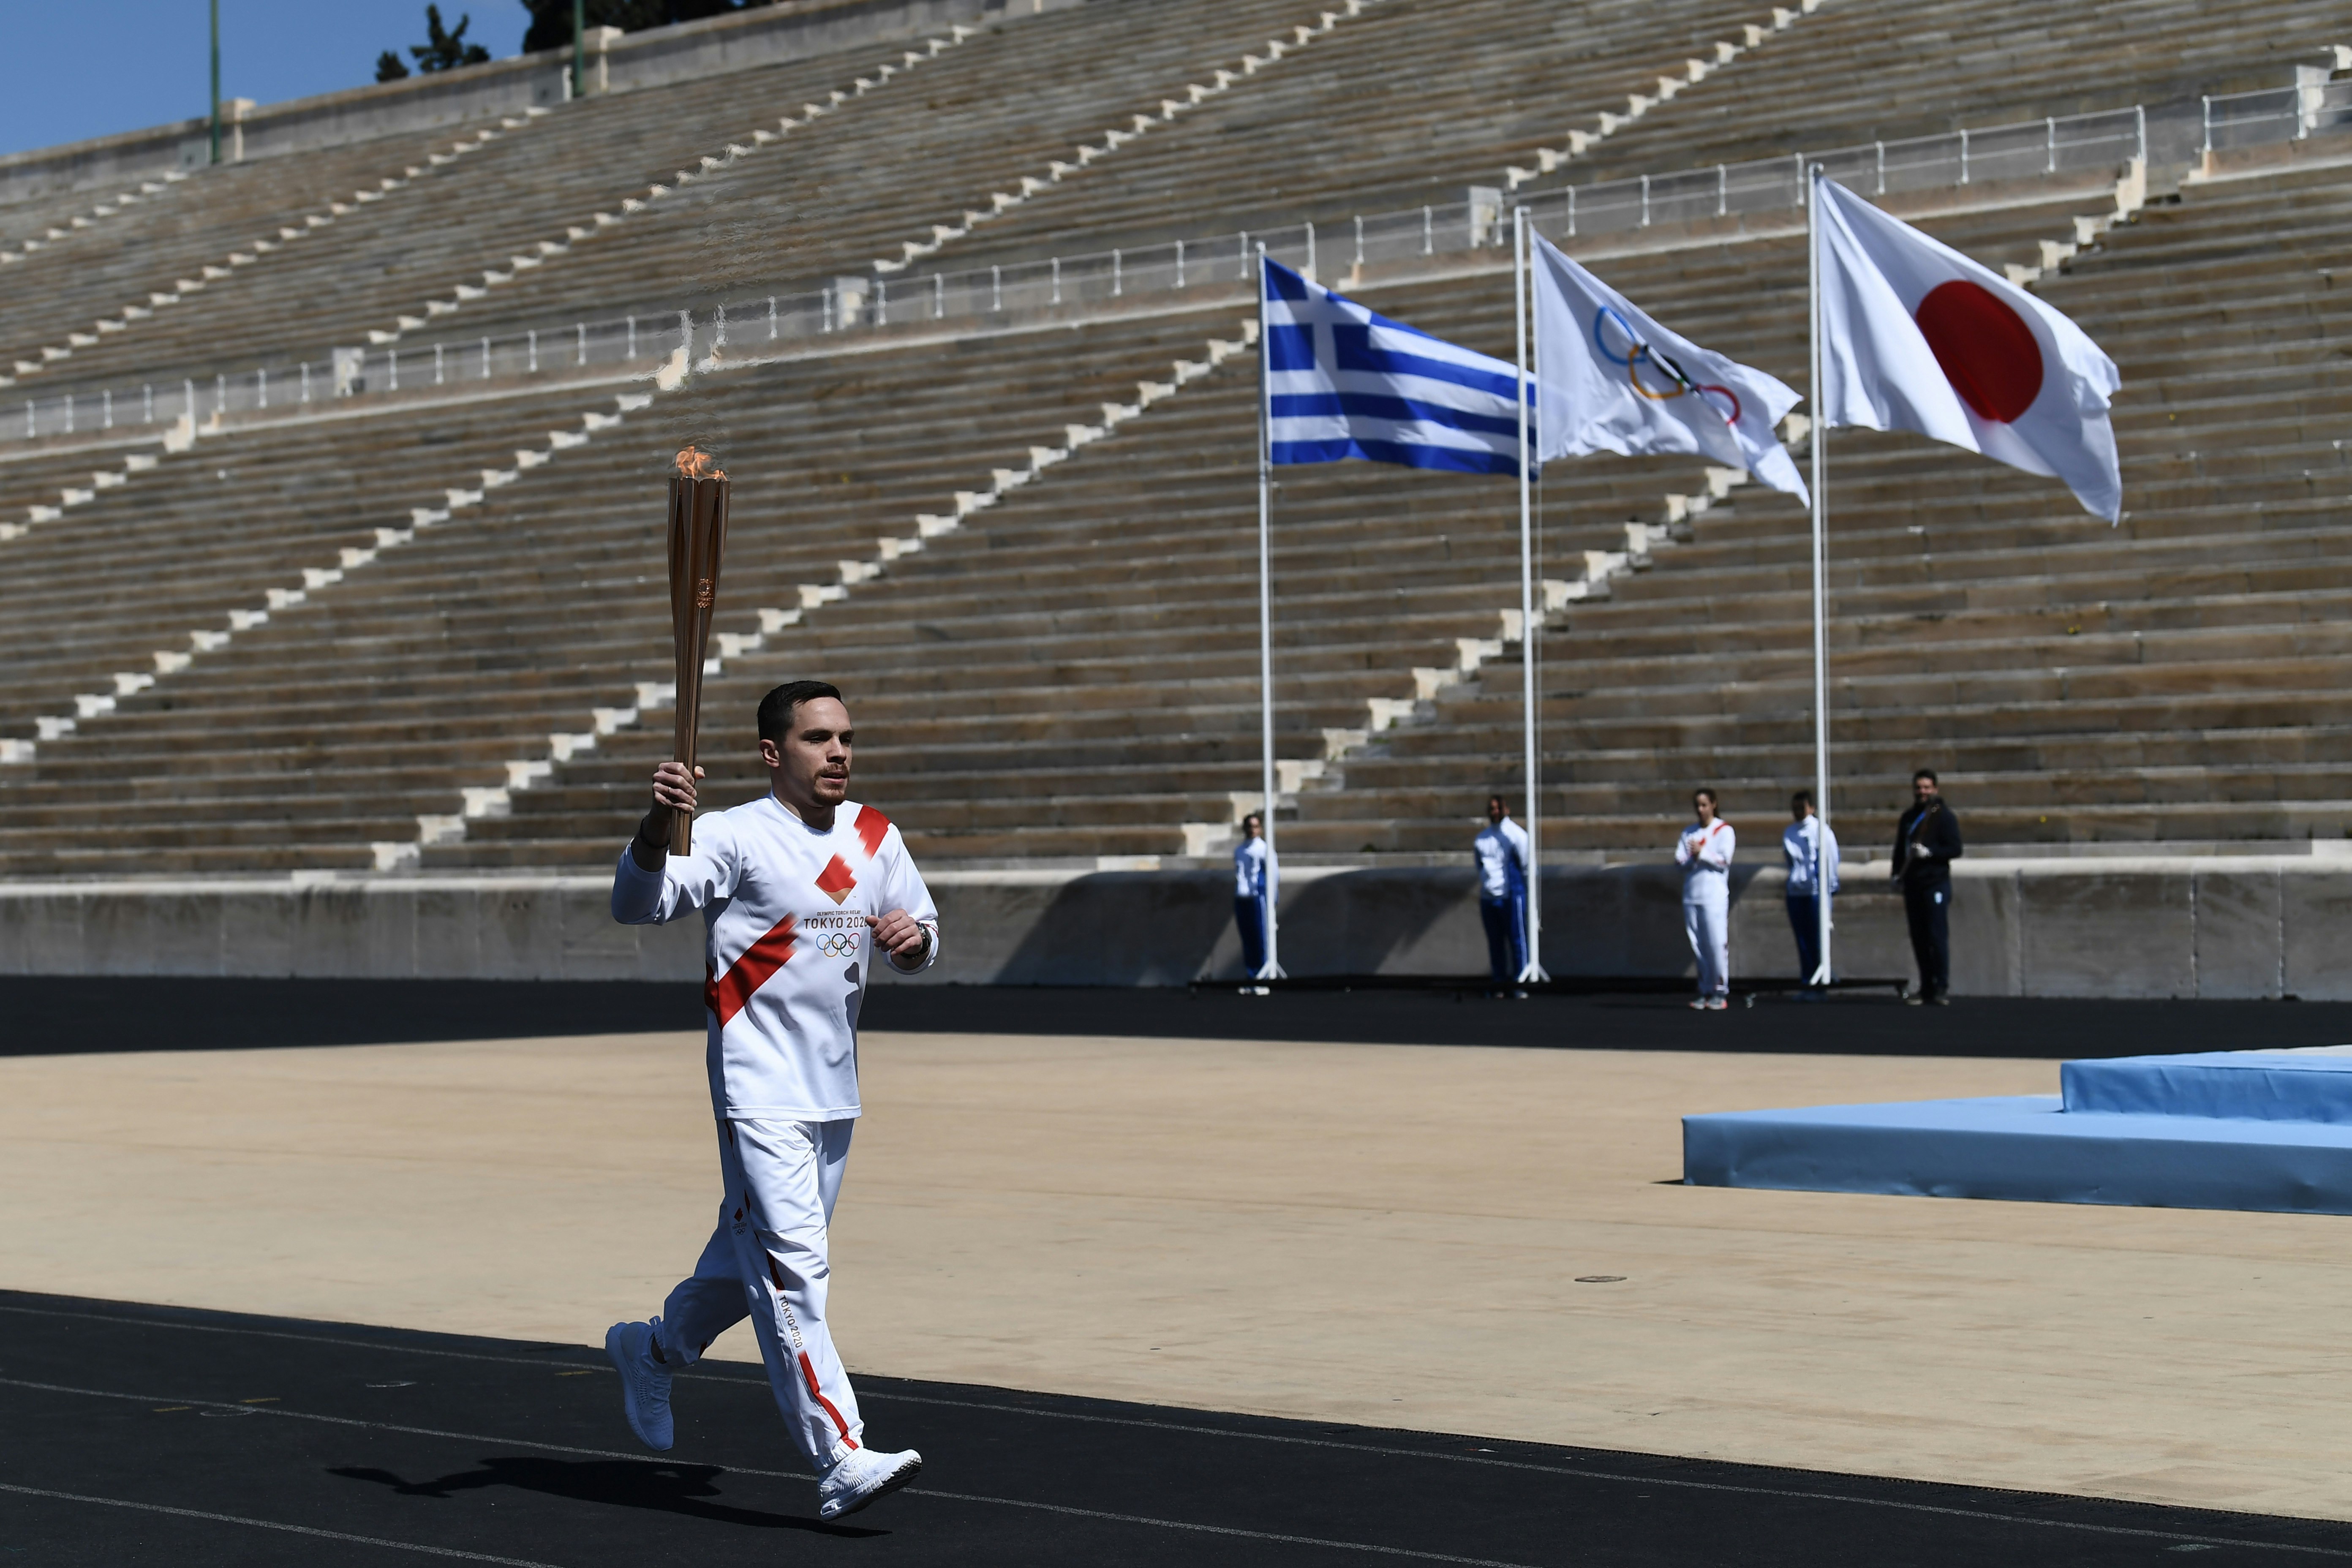 An athlete carries the olympic torch during one of the last relays ahead of during the olympic flame handover ceremony for the 2020 Tokyo Summer Olympics, on March 19, 2020 in Athens. The ceremony is held behind closed doors as a preventive measure against the spread of the Covid-19 caused by the novel Coronavirus. 